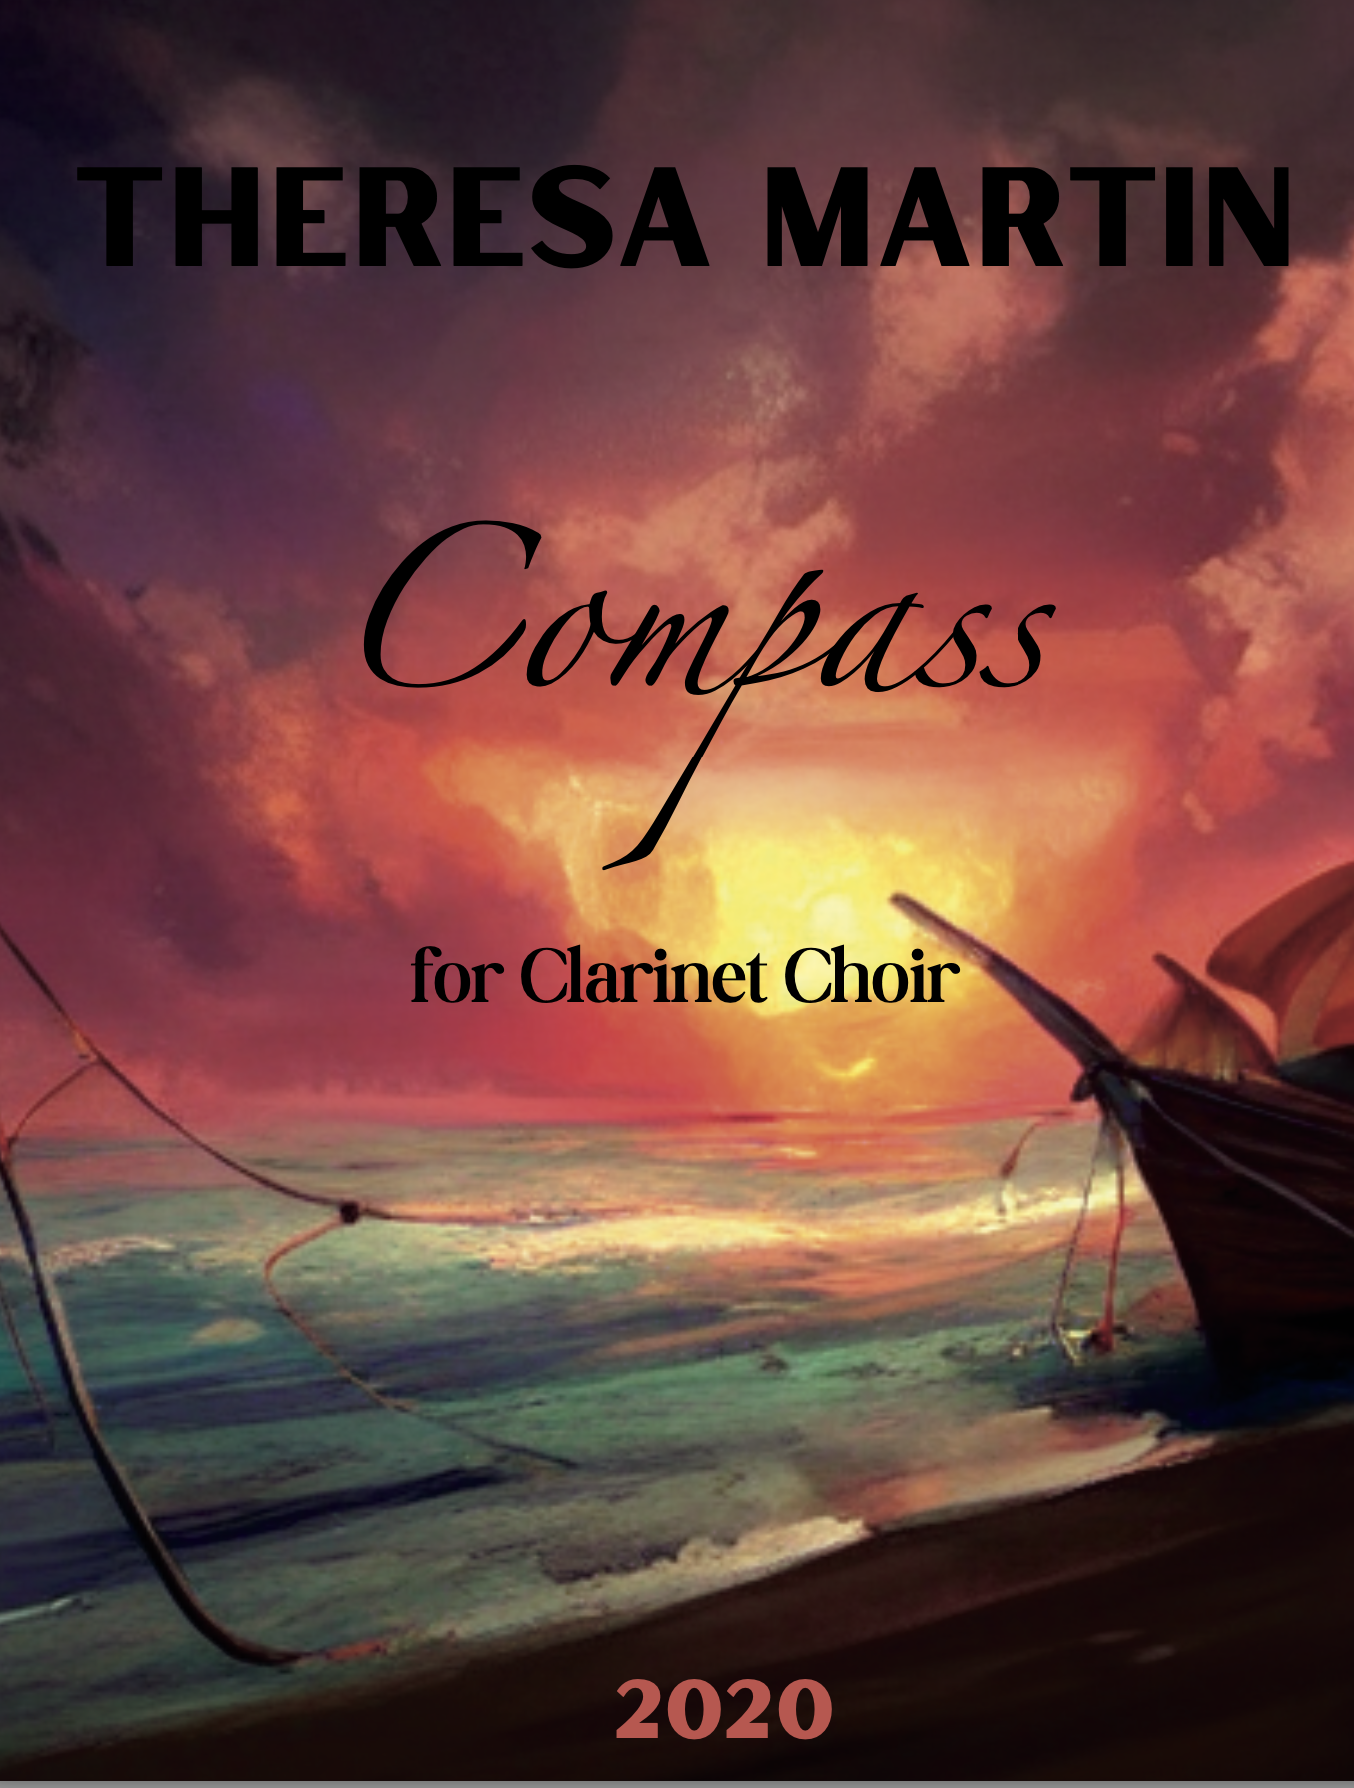 Compass by Theresa Martin